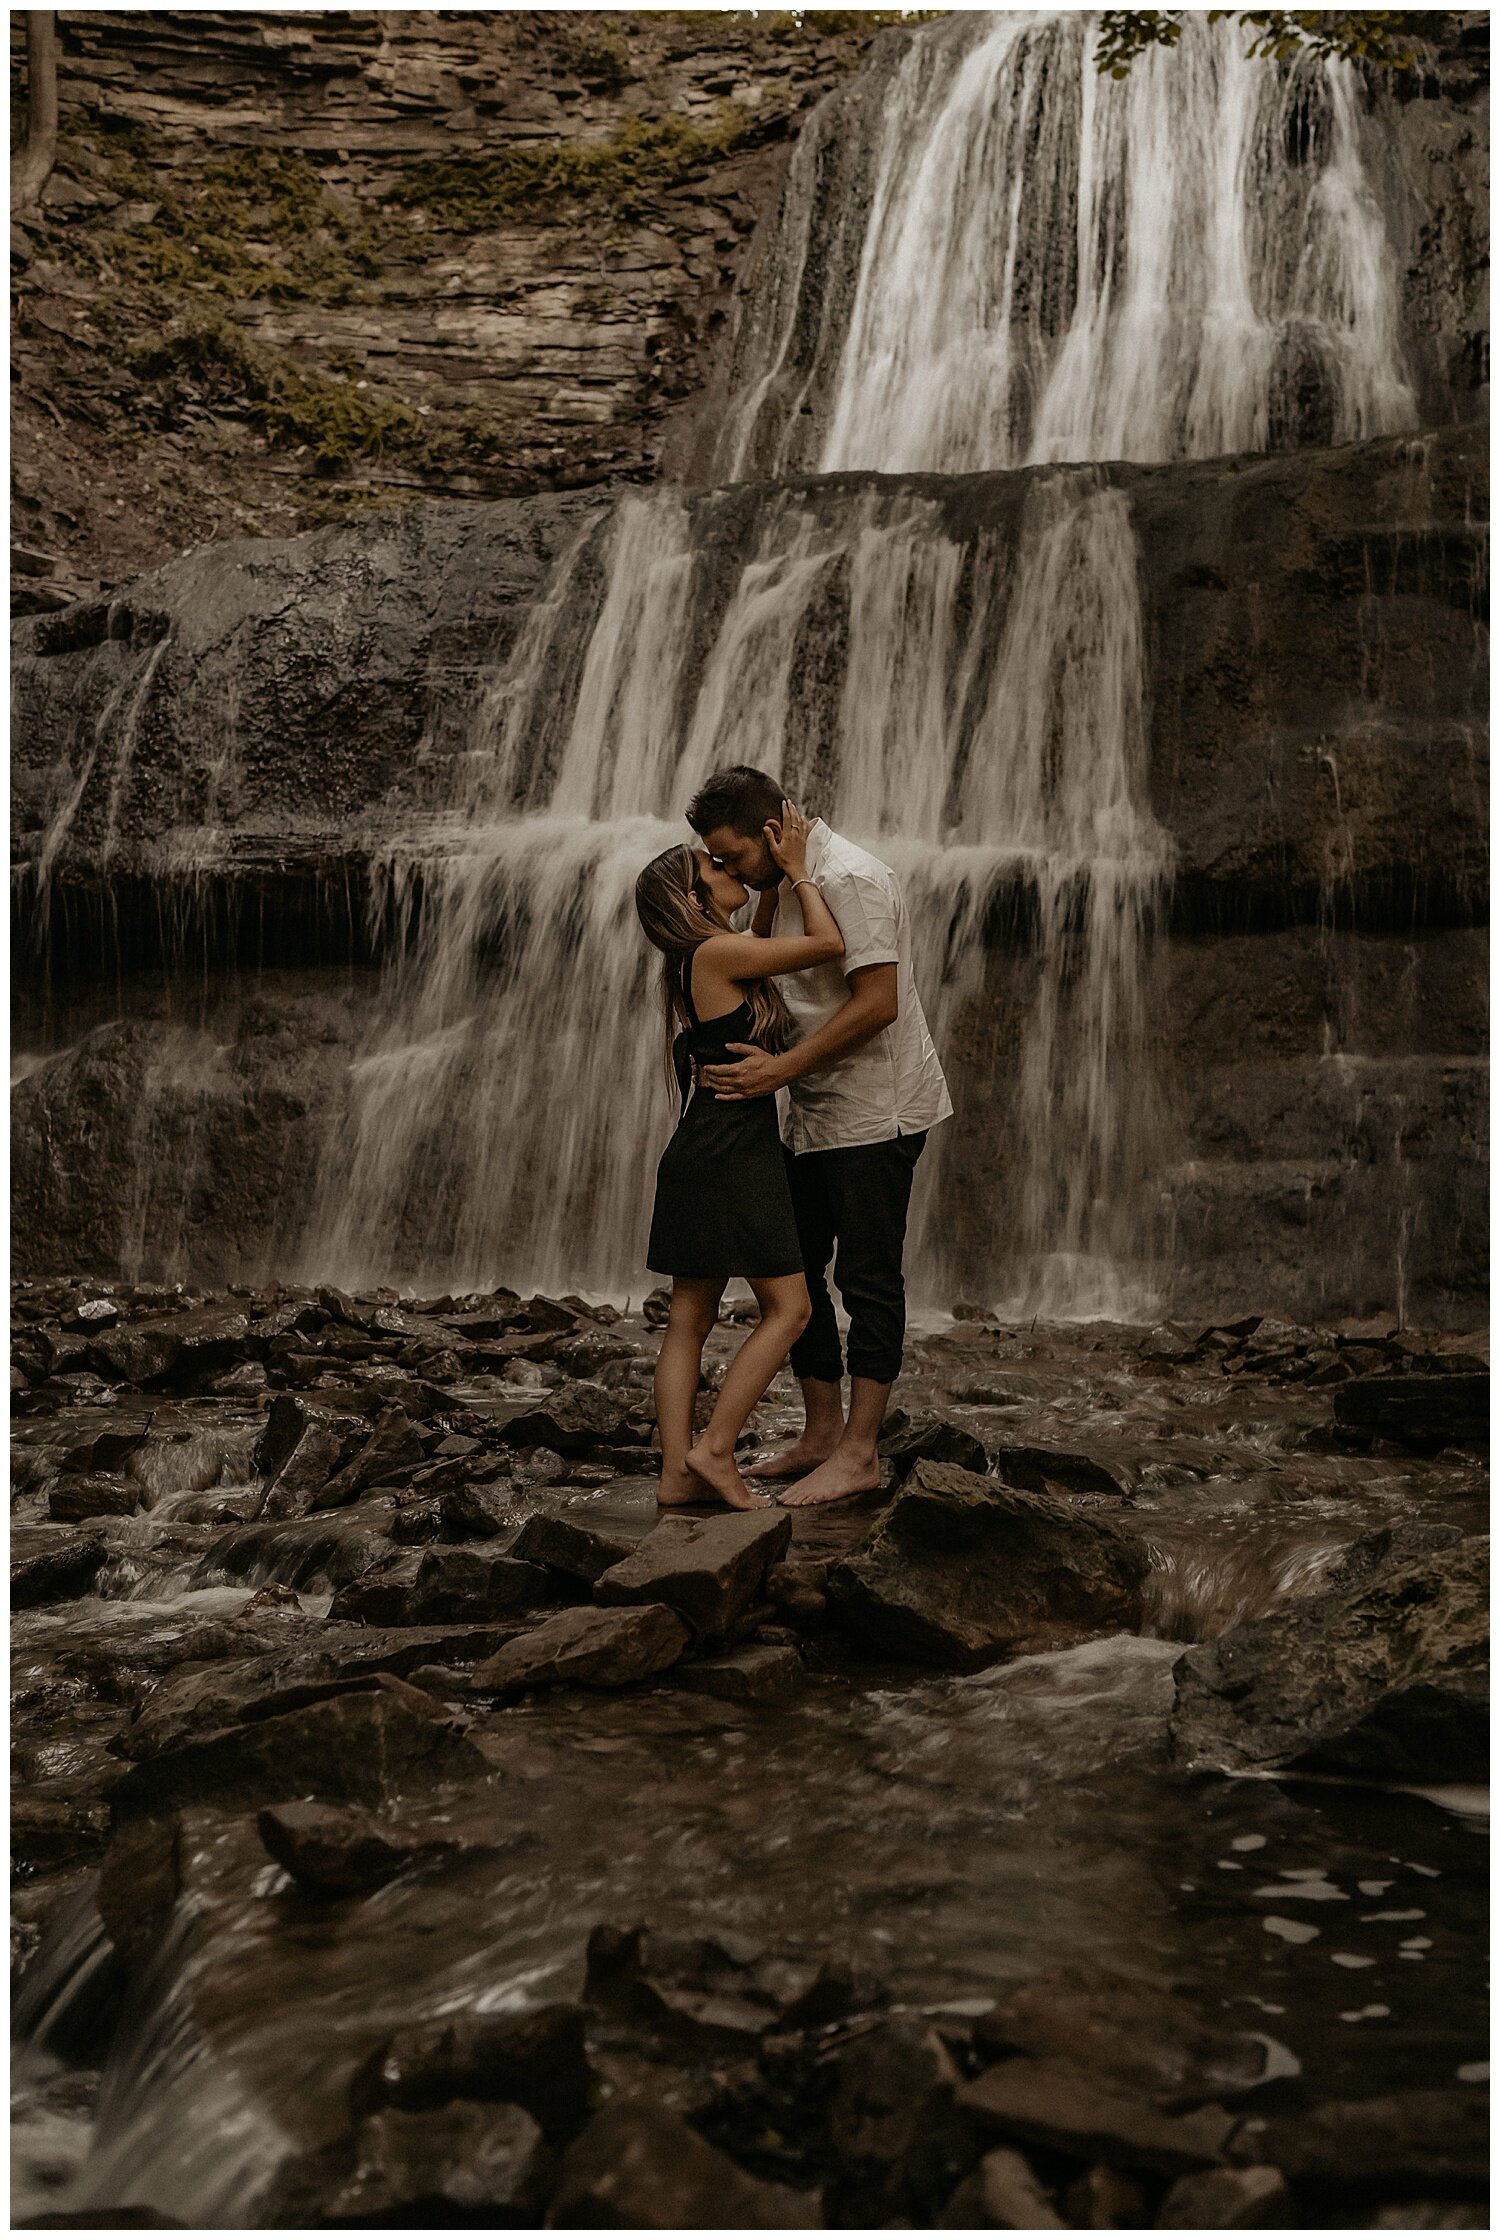 Cotton_Factory_And_Waterfall_Engagement_Session_Hamilton_Ontario_Wedding_Photographer_0107.jpg